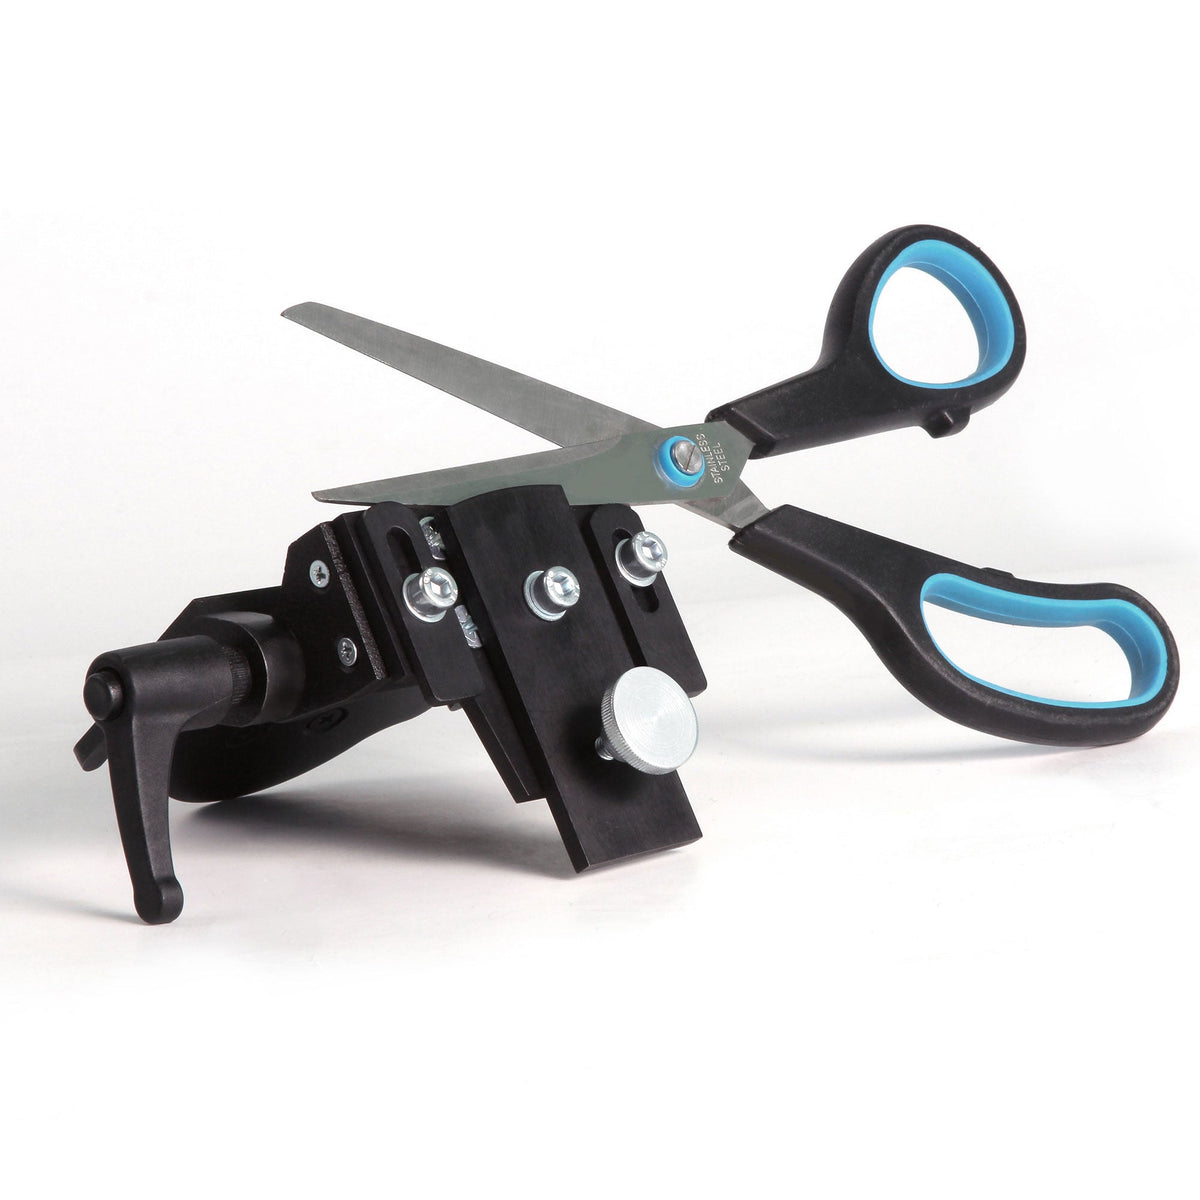 Accessory for knife sharpeners - Scissors Attachment for Hapstone